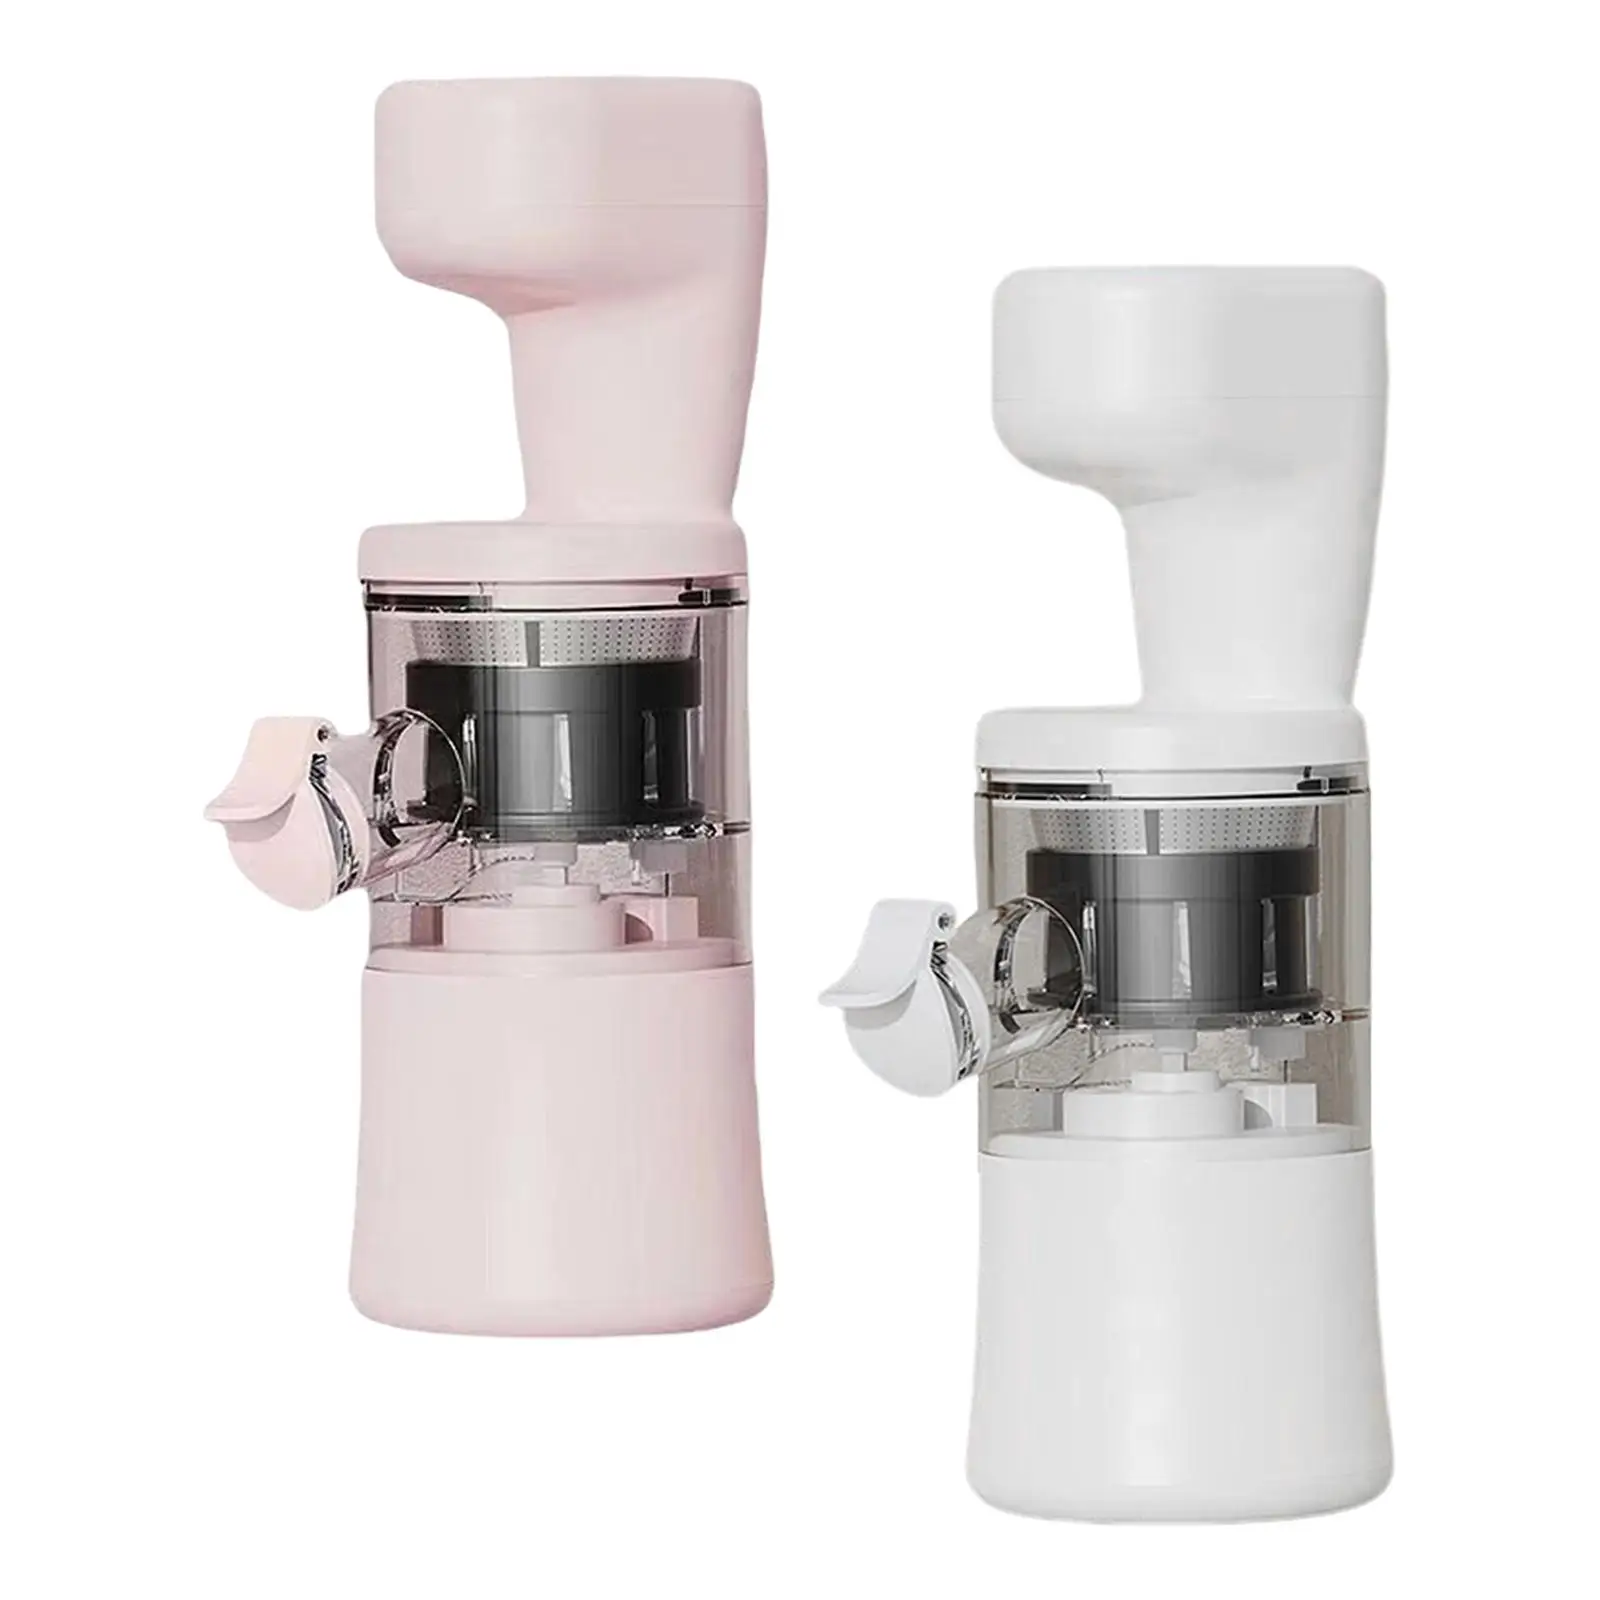 Cordless Blender Juicer Cup USB for Home Office School Office